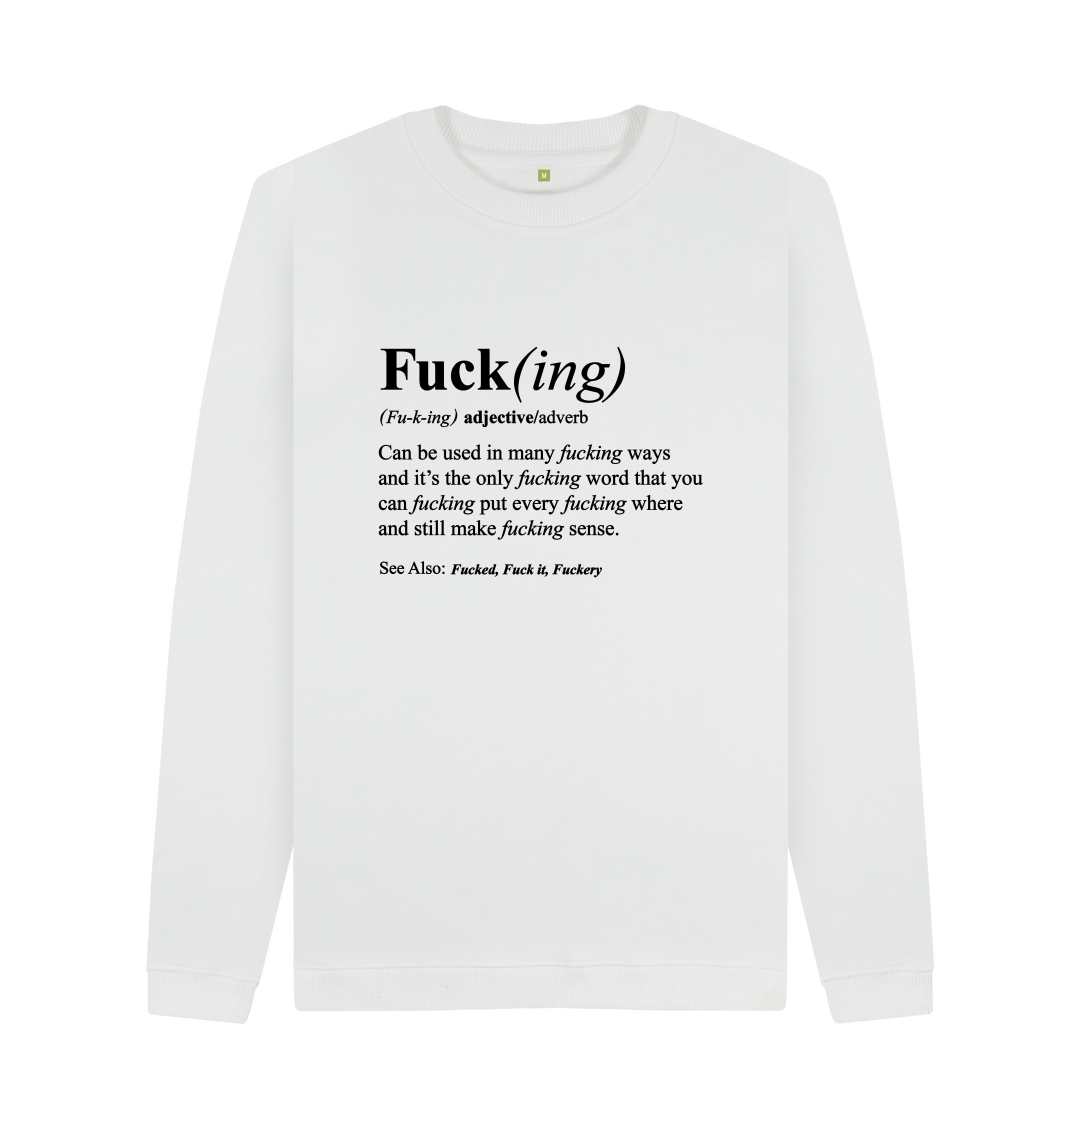 NSFW means shirt, hoodie, sweater and v-neck t-shirt